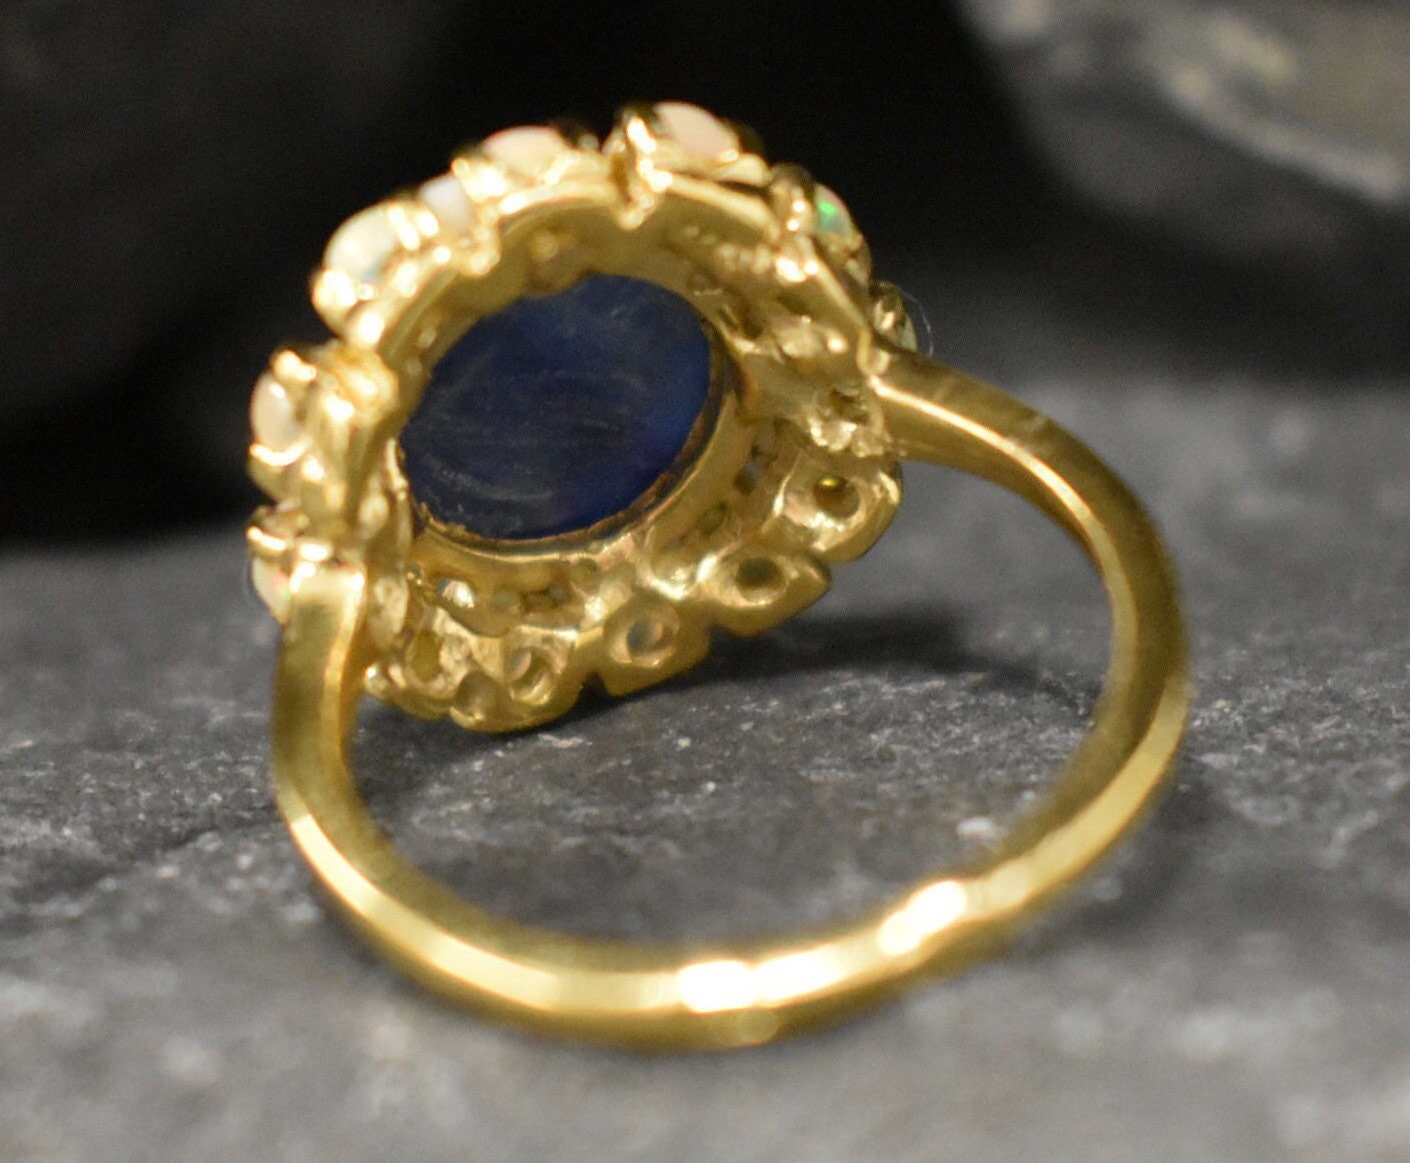 Gold Kyanite Ring, Natural Kyanite, Natural Fire Opal, Gold Victorian Ring, Gold Plated Ring, Blue Flower Ring, Statement Ring, Vermeil Ring